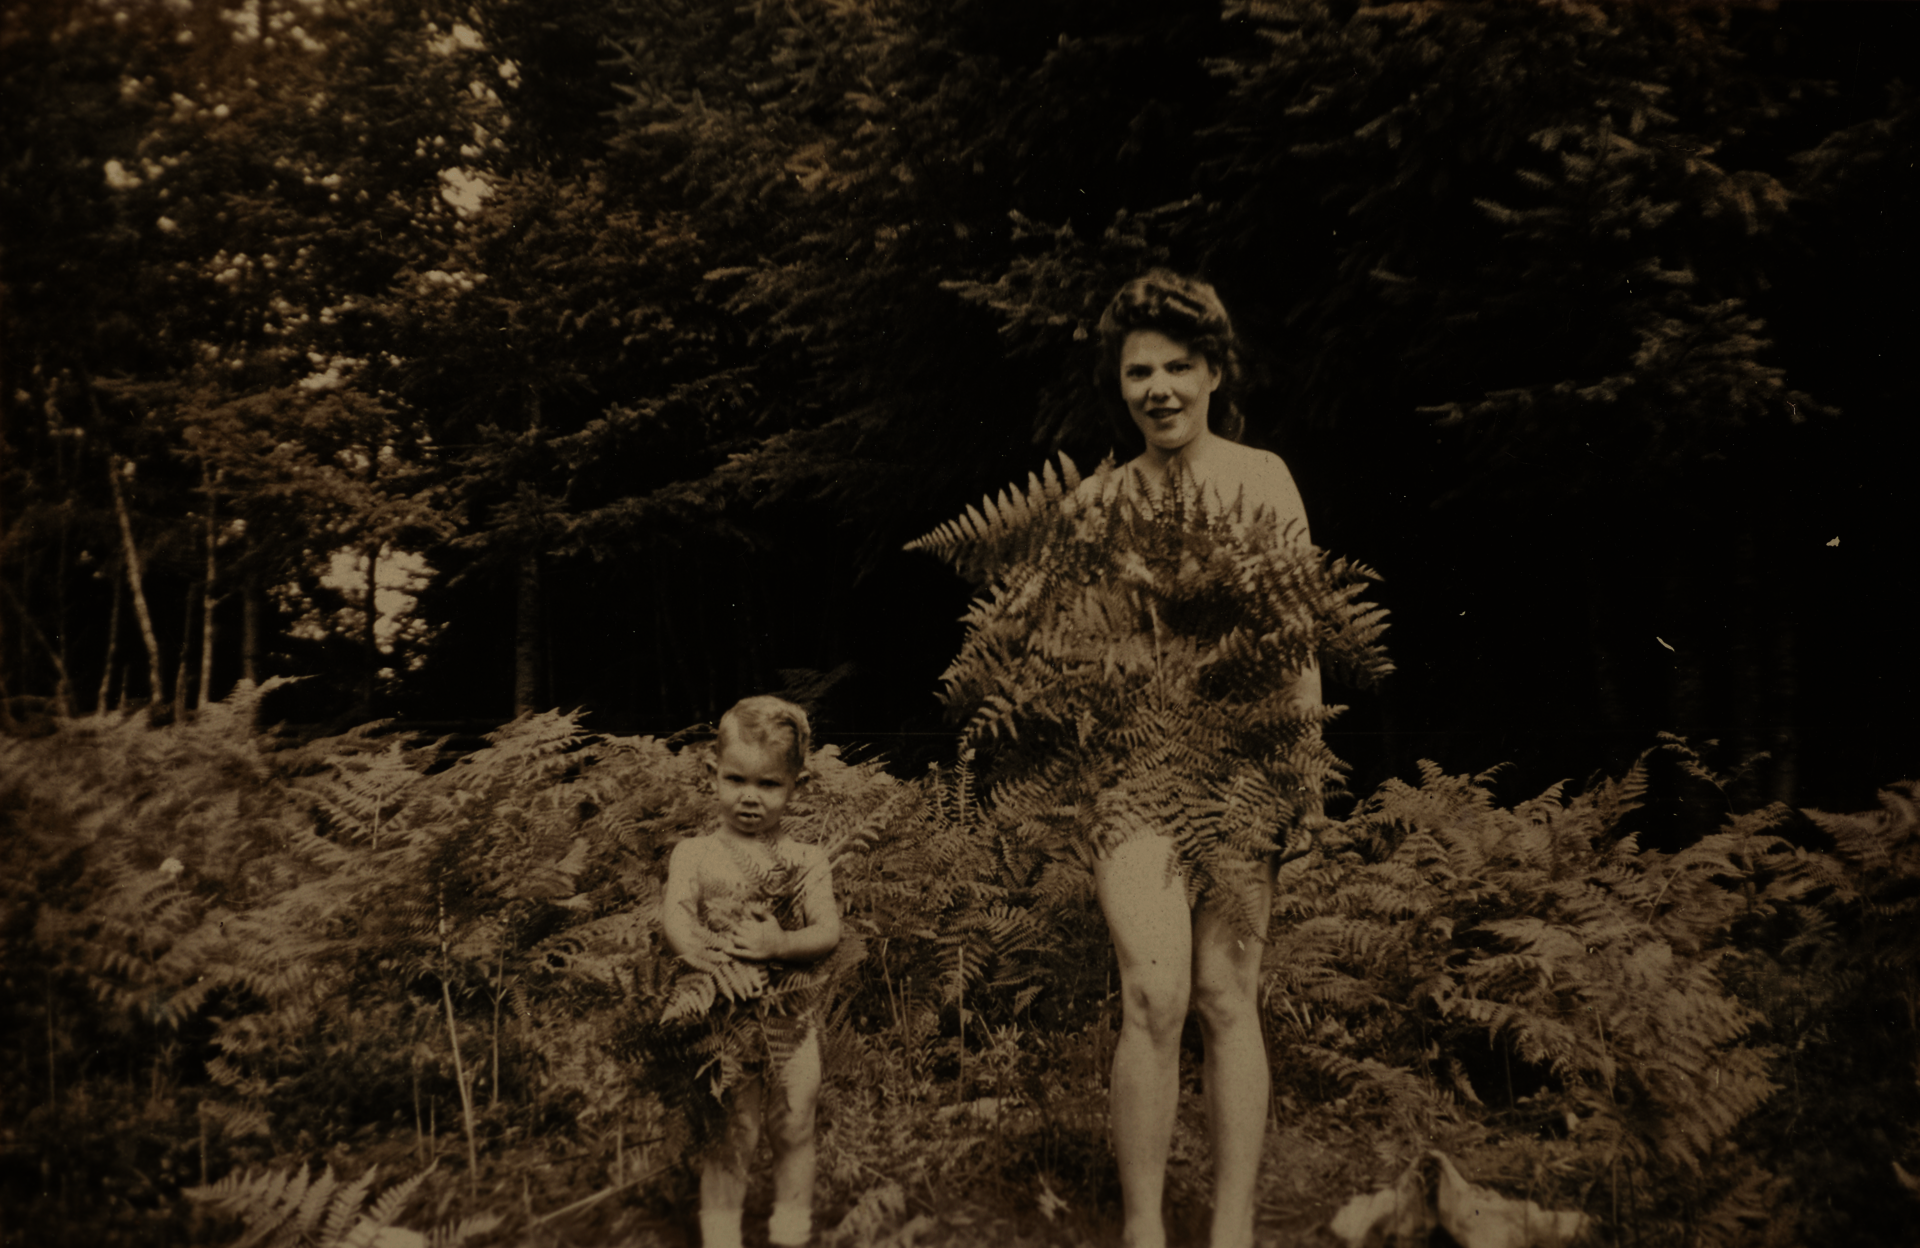 Snapshot of a light-skinned woman and young child standing naked in a bed of ferns at the edge of a forest. The woman smiles, both covering themselves with fern fronds.